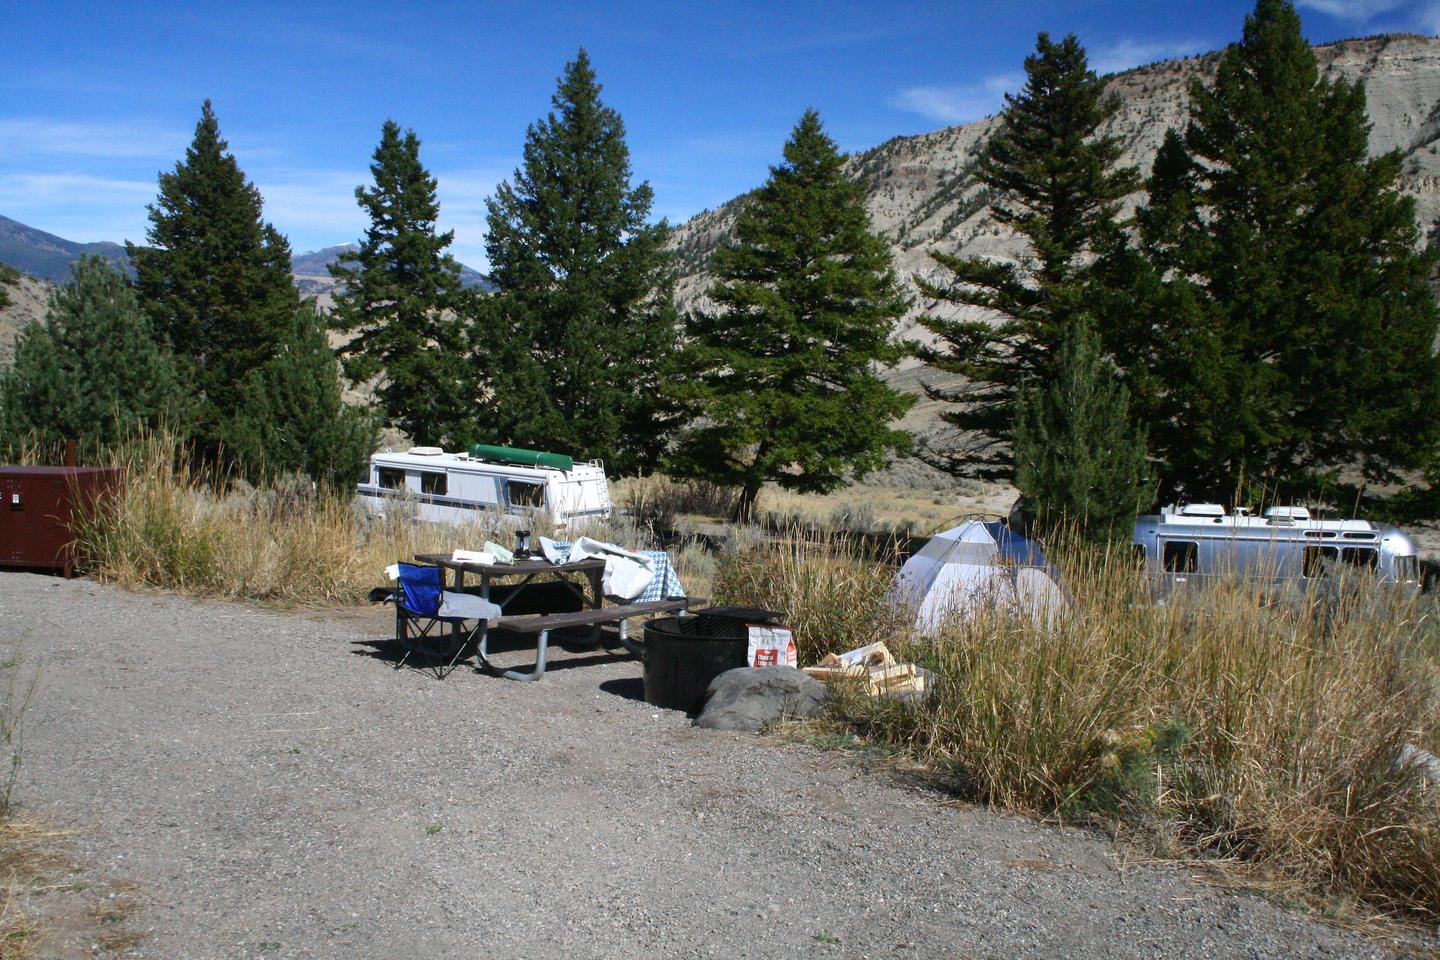 Mammoth Hot Springs Campground Site 75Mammoth Campsite #75, looking north